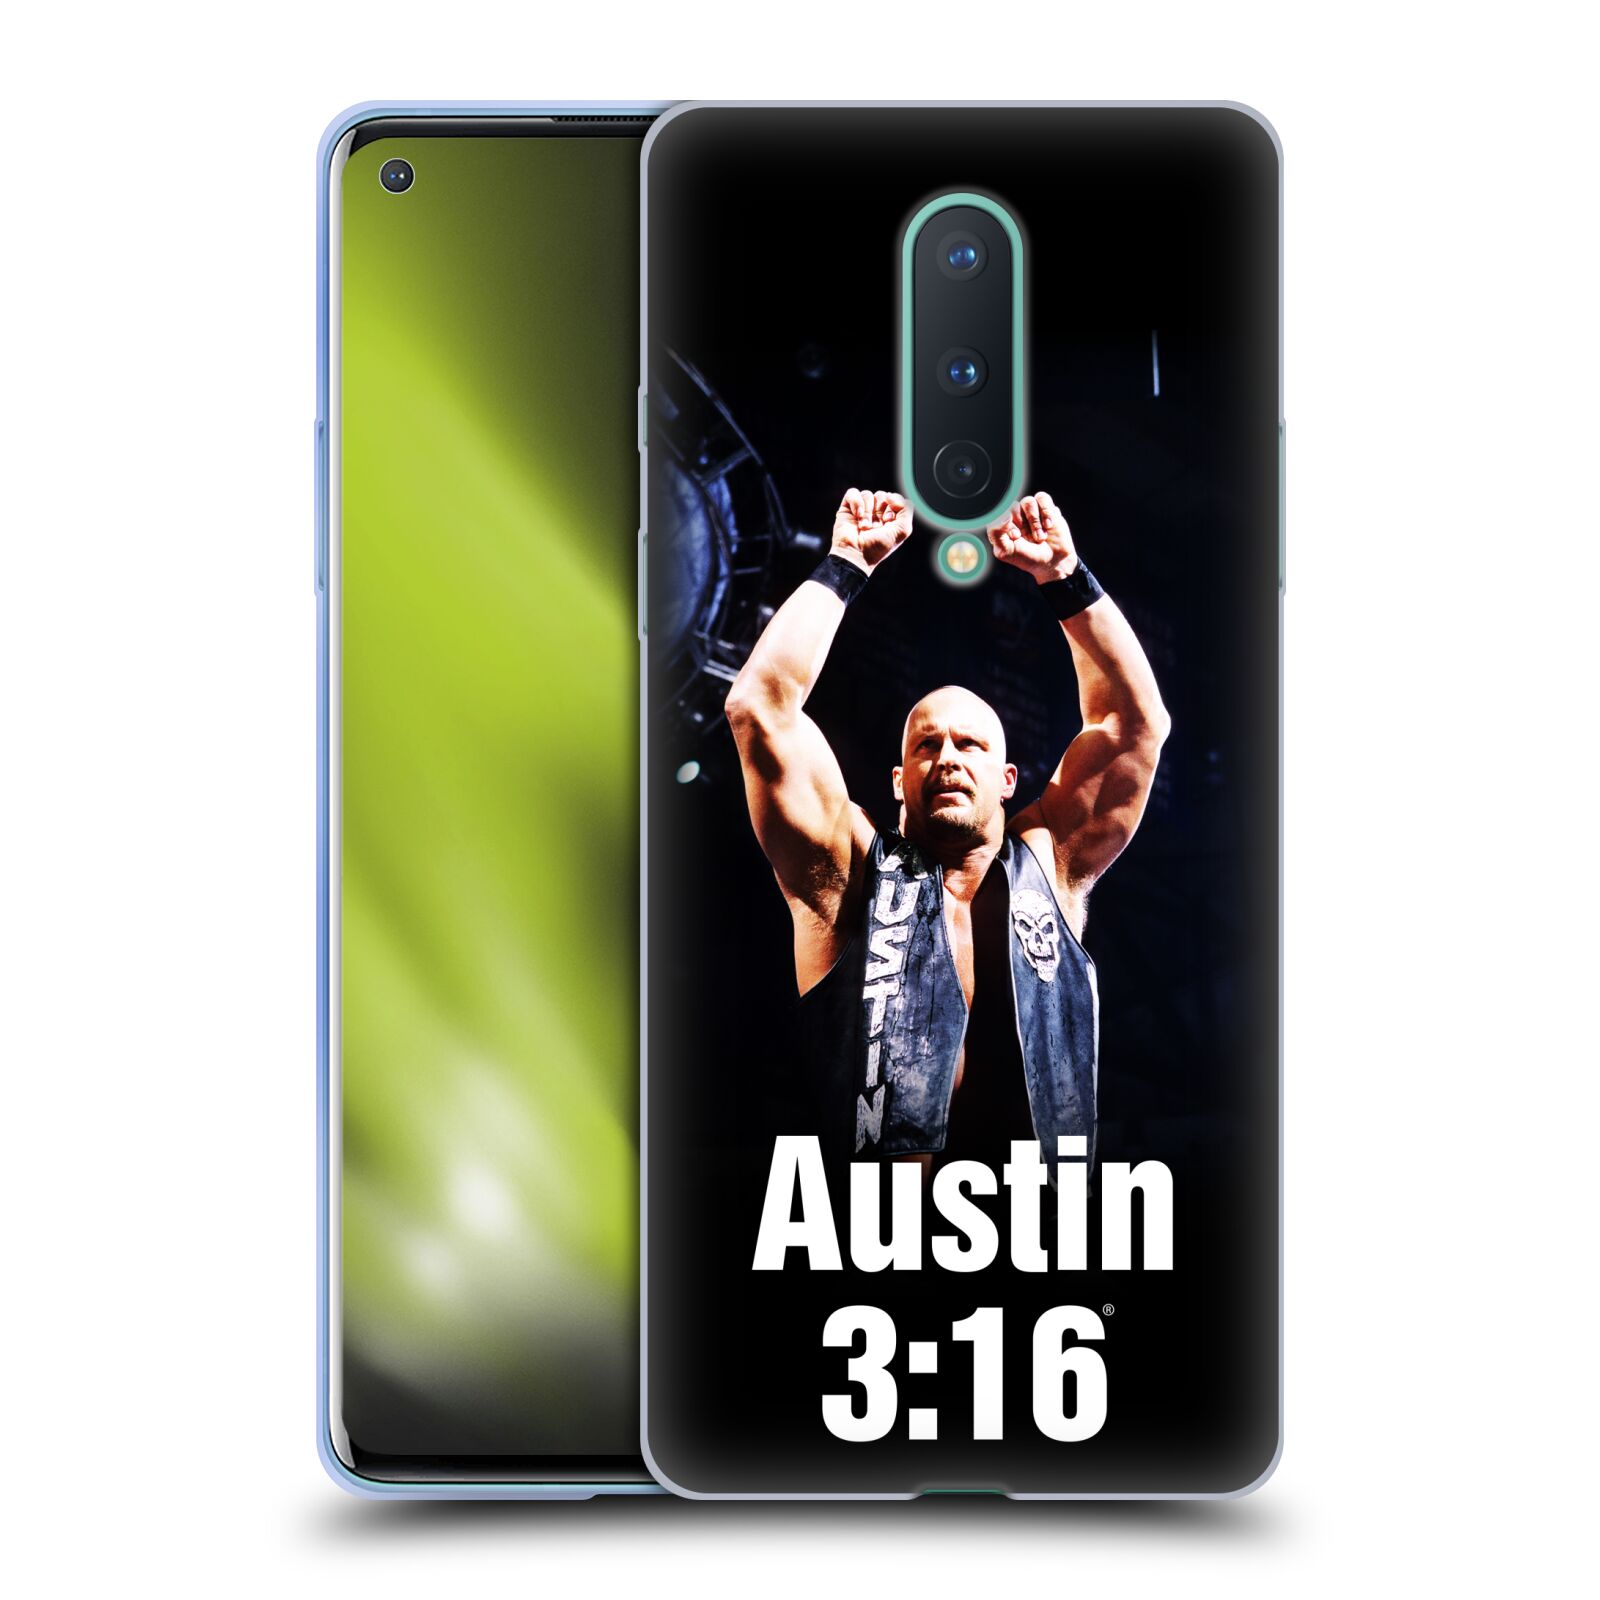 OFFICIAL WWE STONE COLD STEVE AUSTIN SOFT GEL CASE FOR GOOGLE ONEPLUS PHONES